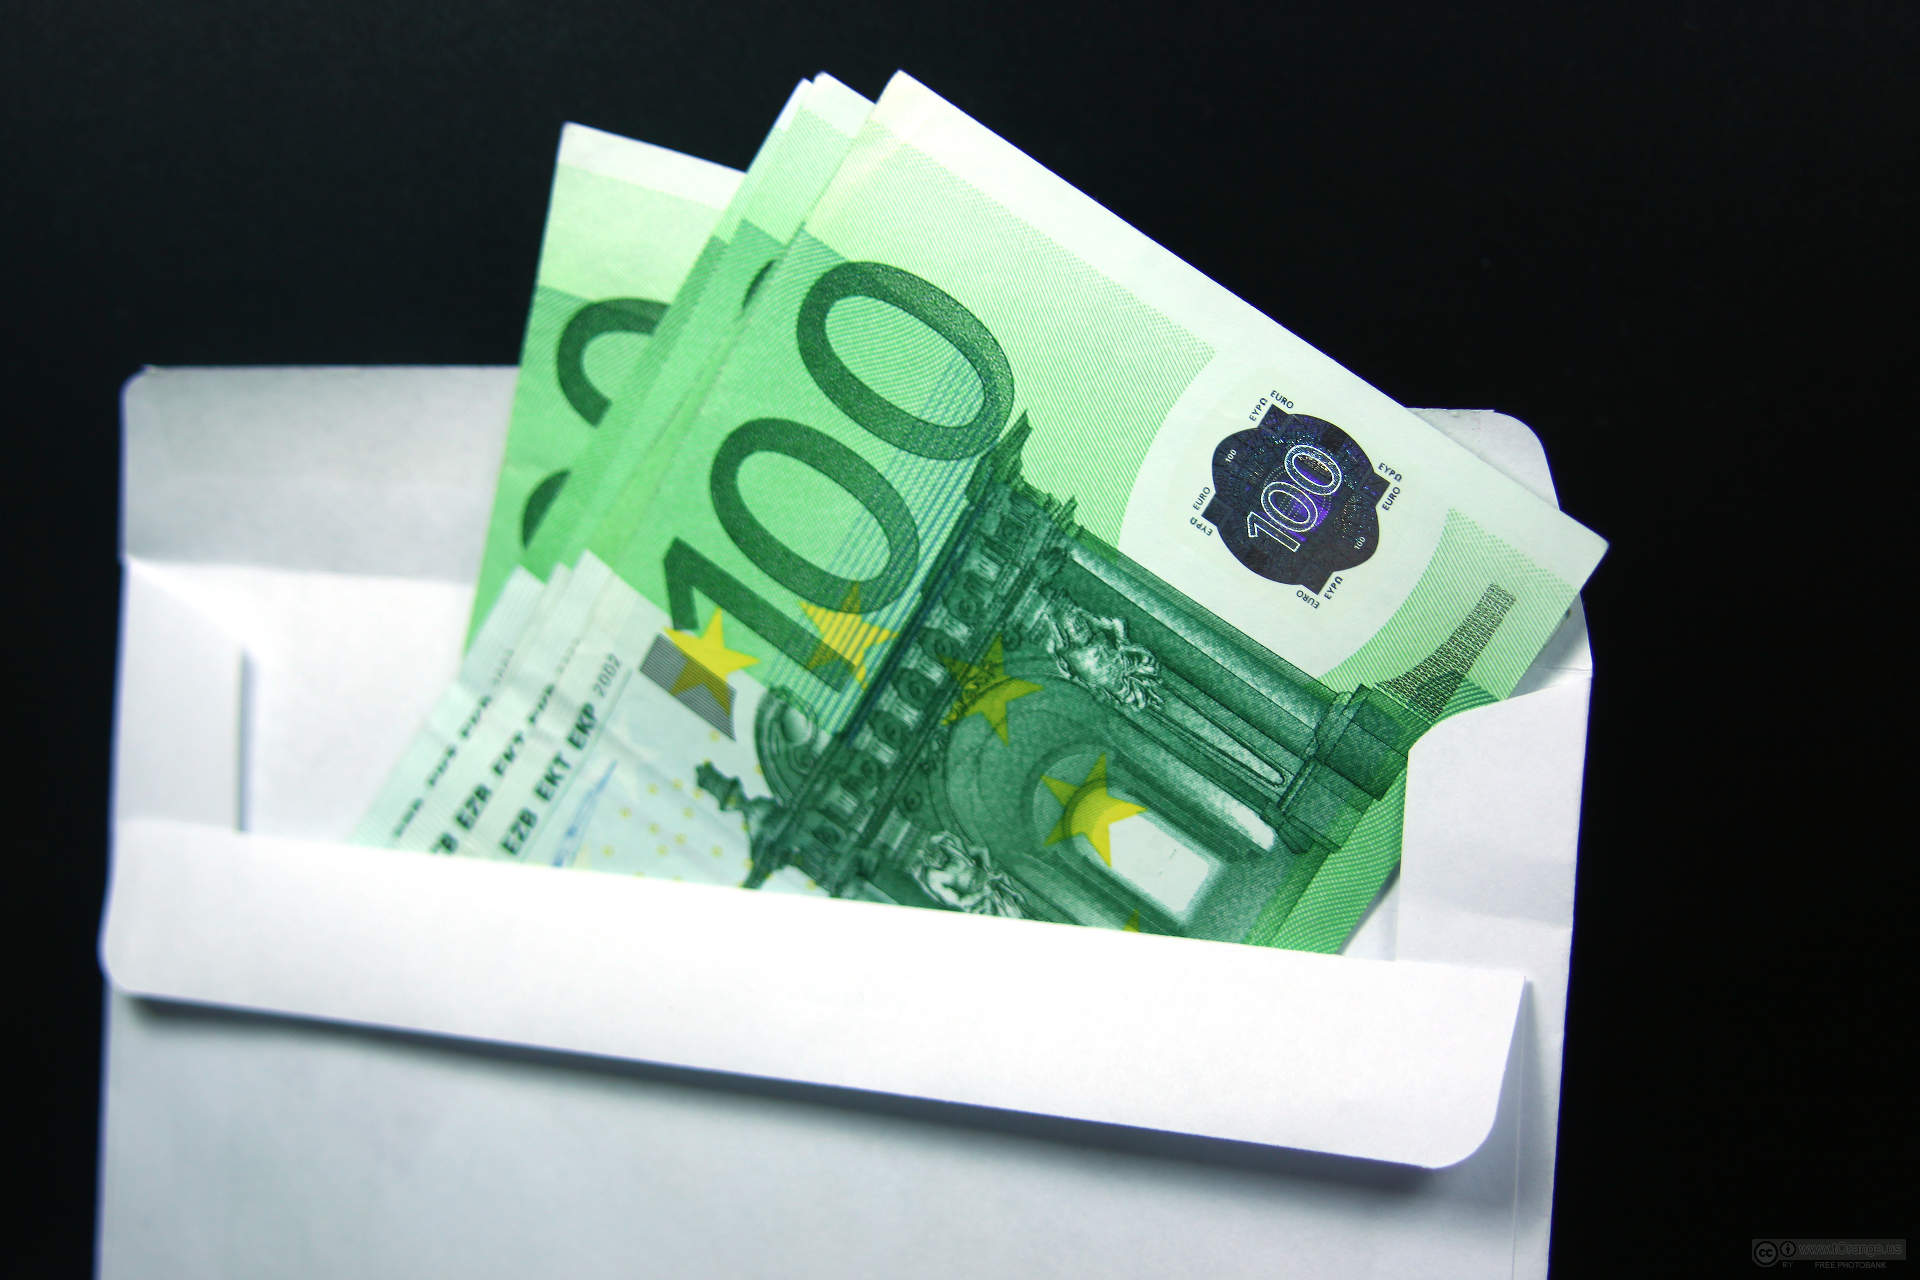 Payment Cash (cash currency). Euros in an envelope.